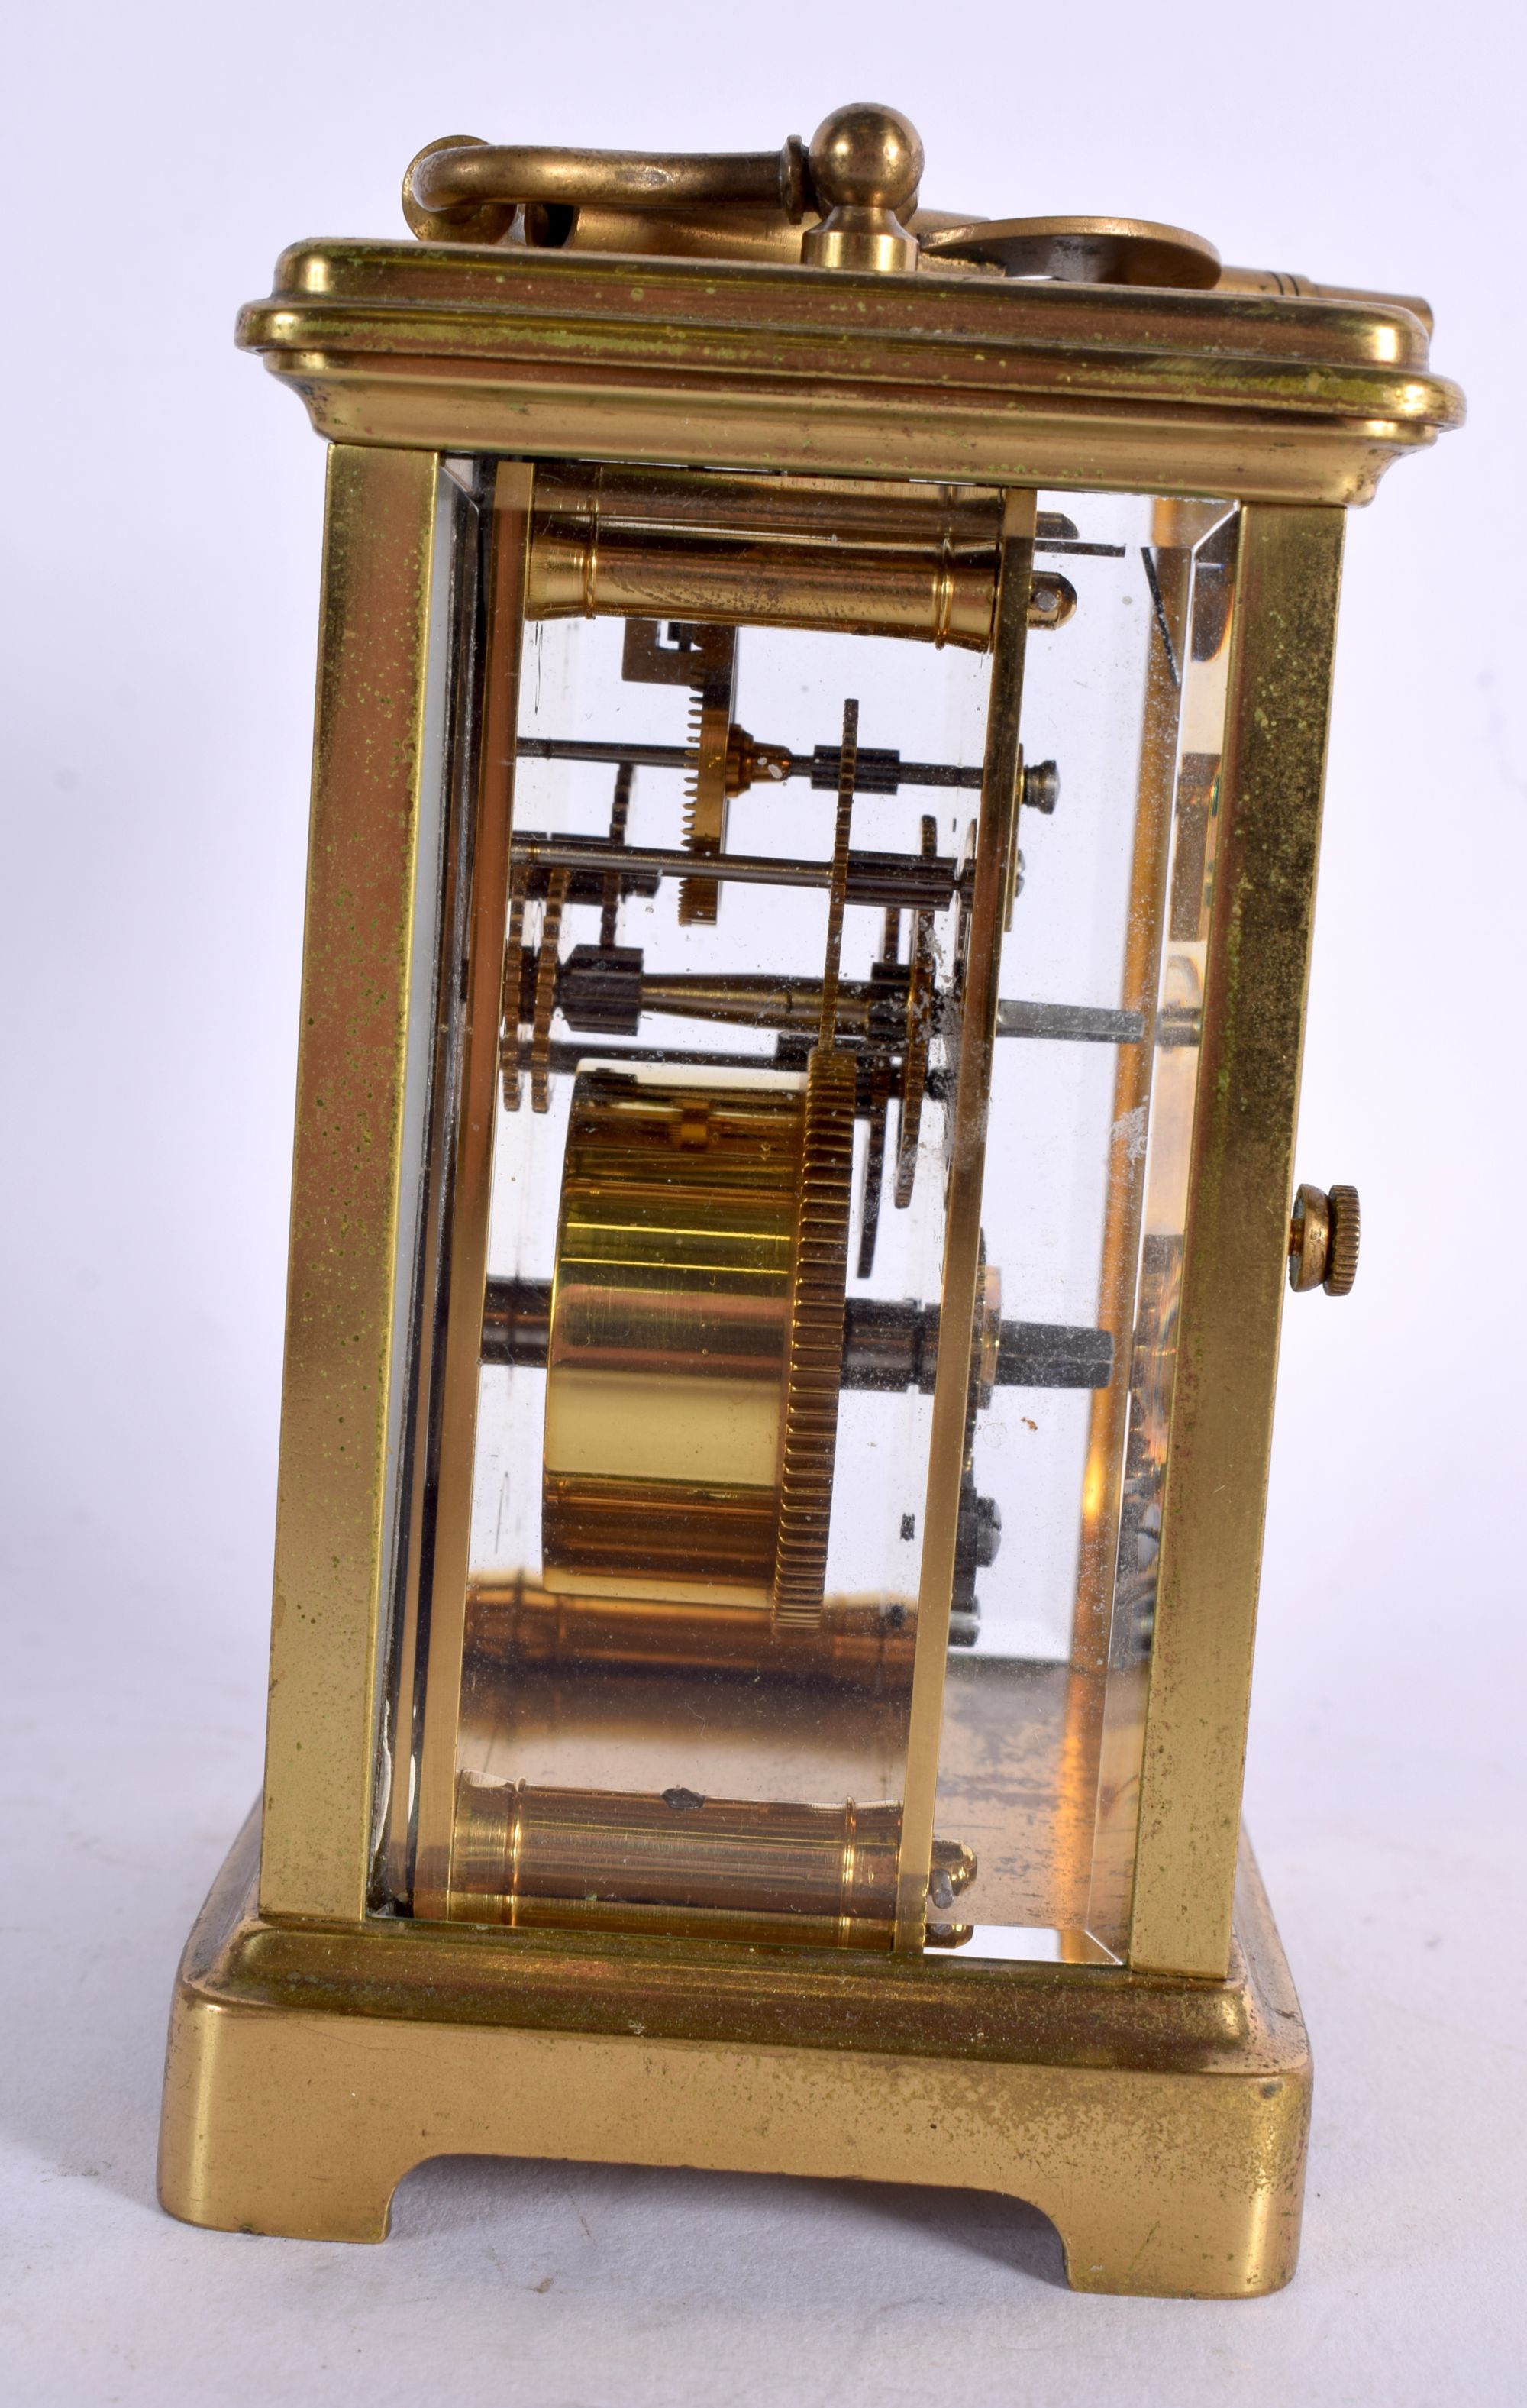 AN EARLY 20TH CENTURY FRENCH BRASS CARRIAGE CLOCK. 13.5 cm high inc handle. - Image 2 of 5